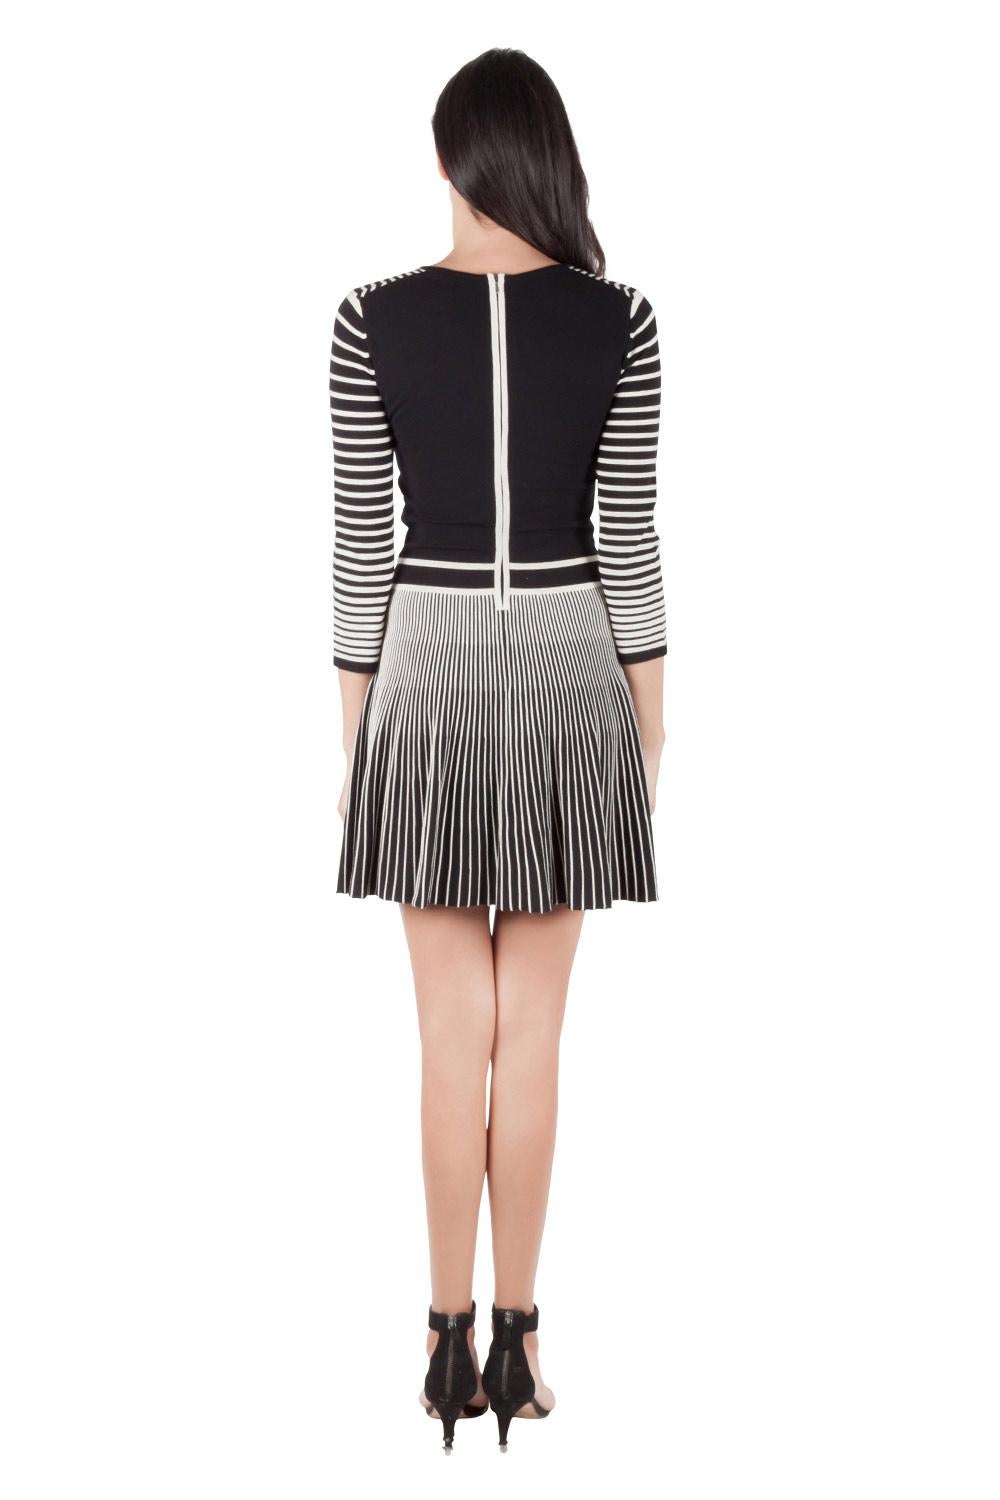 Marc by Marc Jacobs has designed this black A-line dress to mark your presence with great style. Featuring a radio waves pattern, the sophisticated piece will work for day as well as night events. It offers a comfortable fit and comes with a back